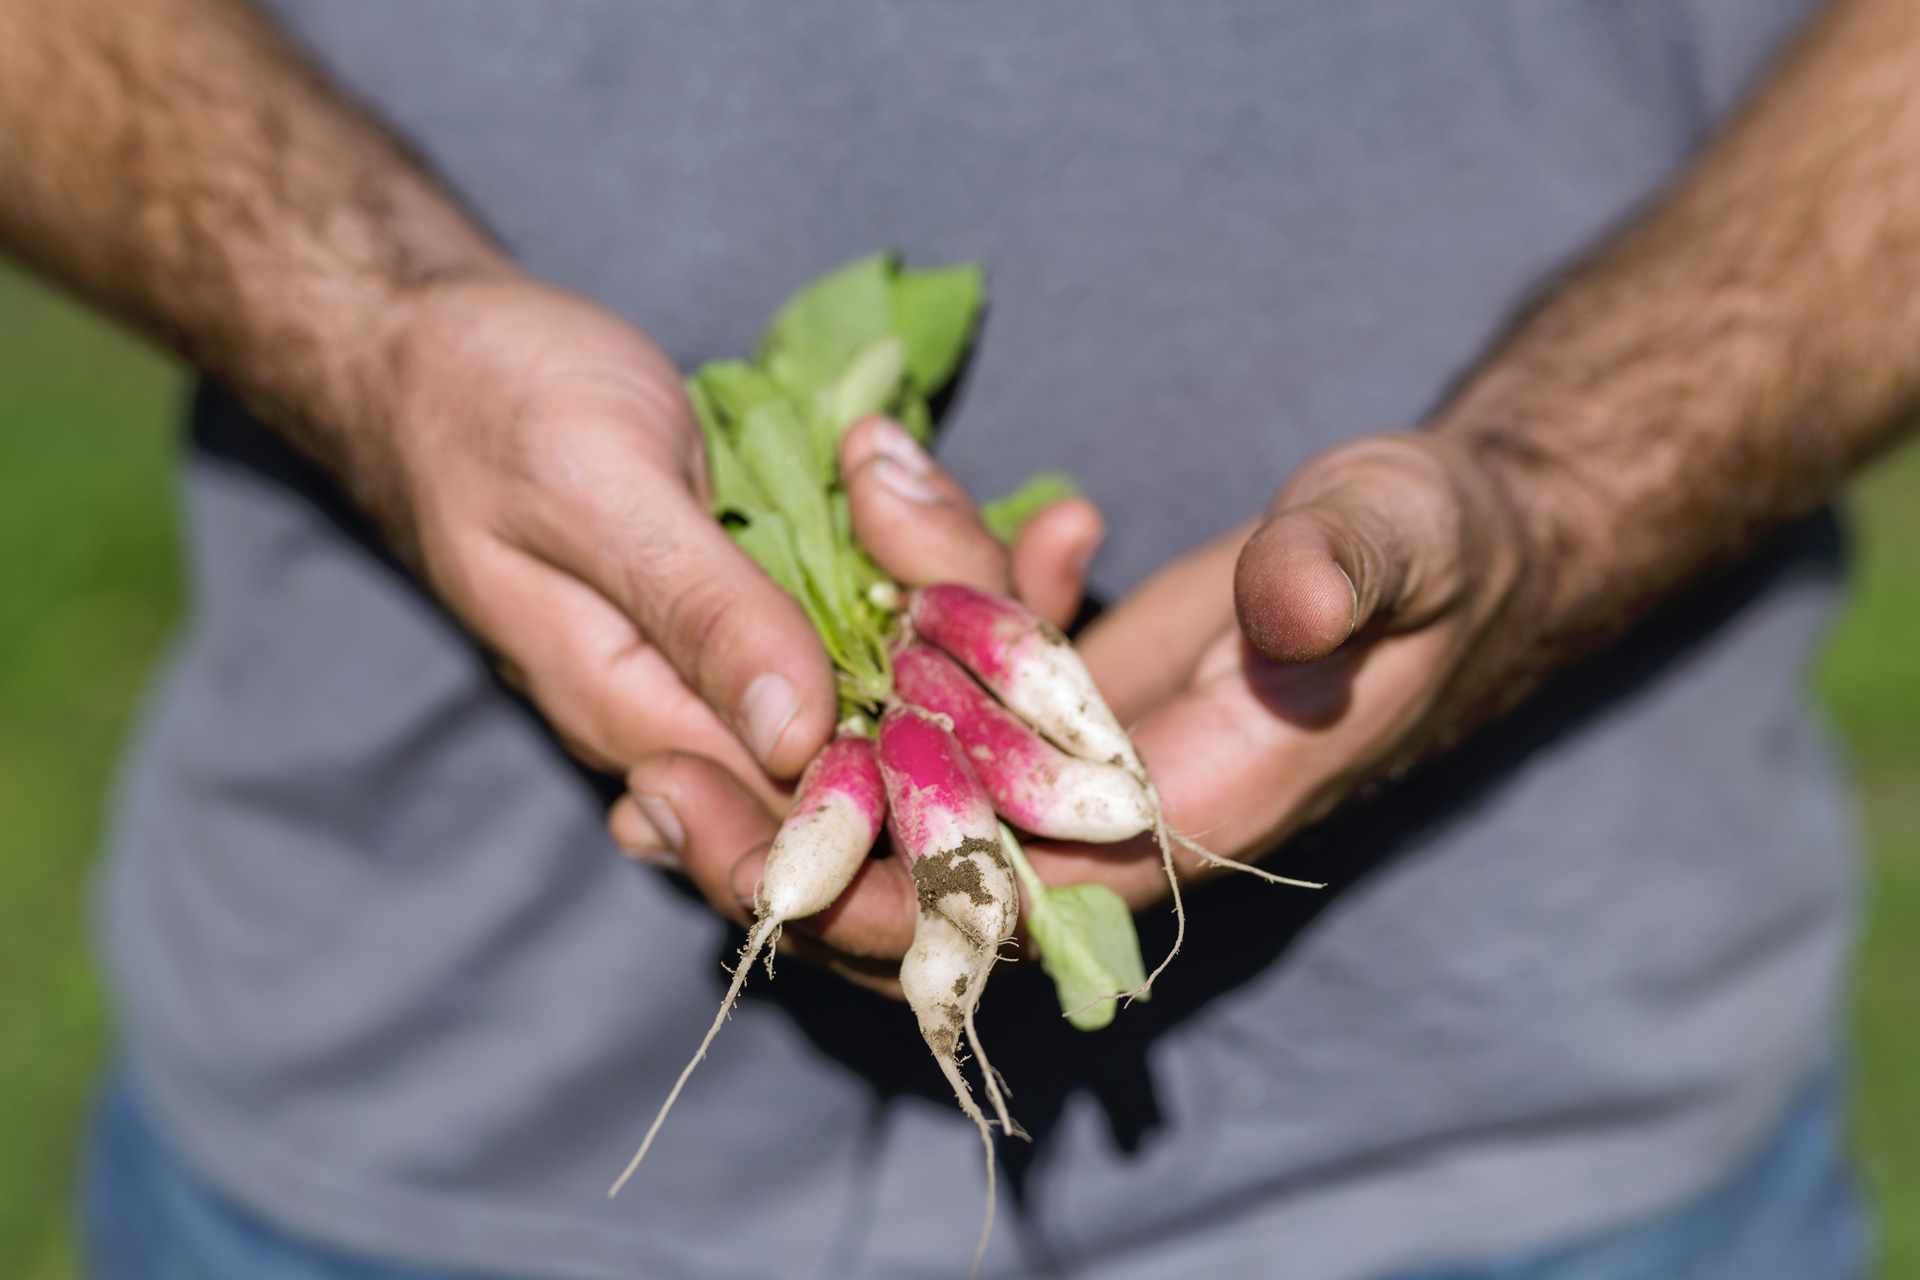 A handful of just-picked radishes